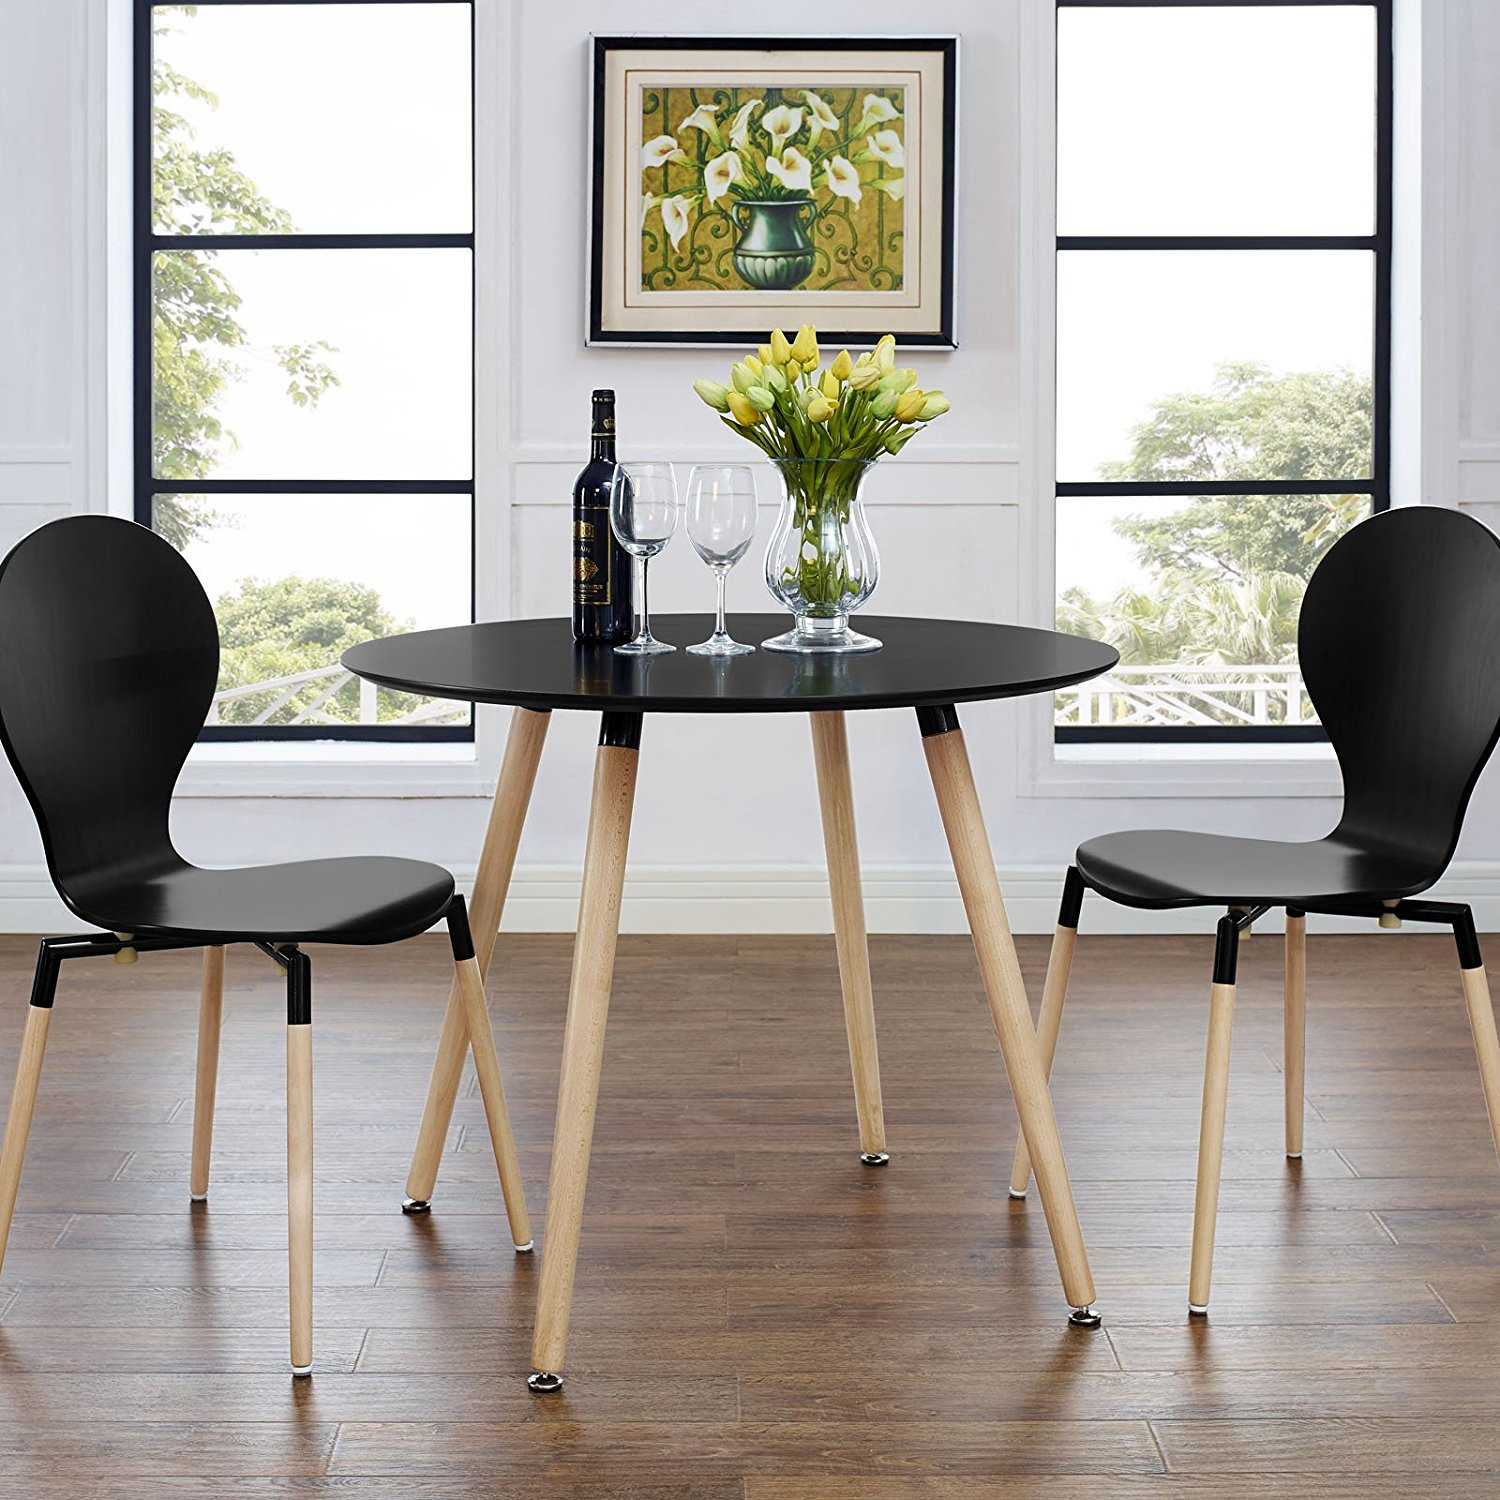 Small Round Kitchen Table
 Twenty dining tables that work great in small spaces